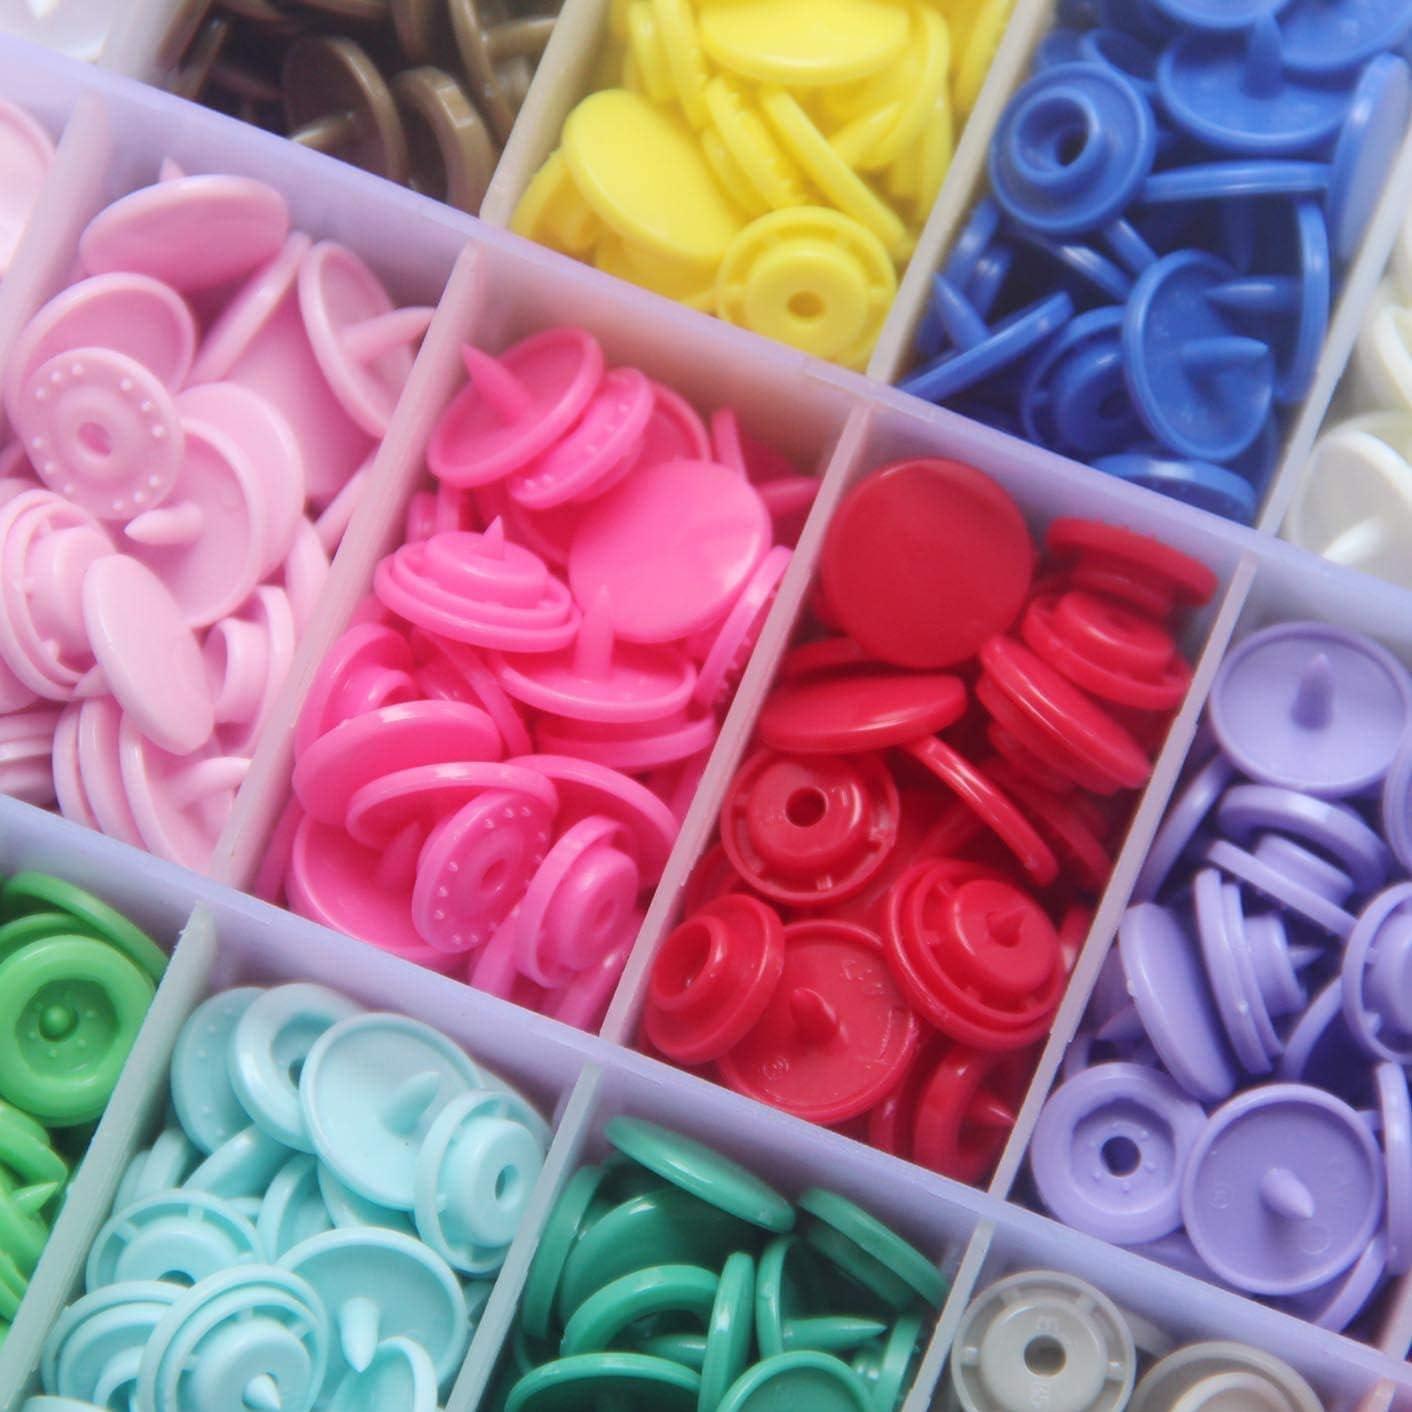 25, Size 20, T5, 12.4mm Original KAM Snaps in a Choice of Colours, Plastic  Snap Fasteners for Bibs, Clothing Fasteners, and More 